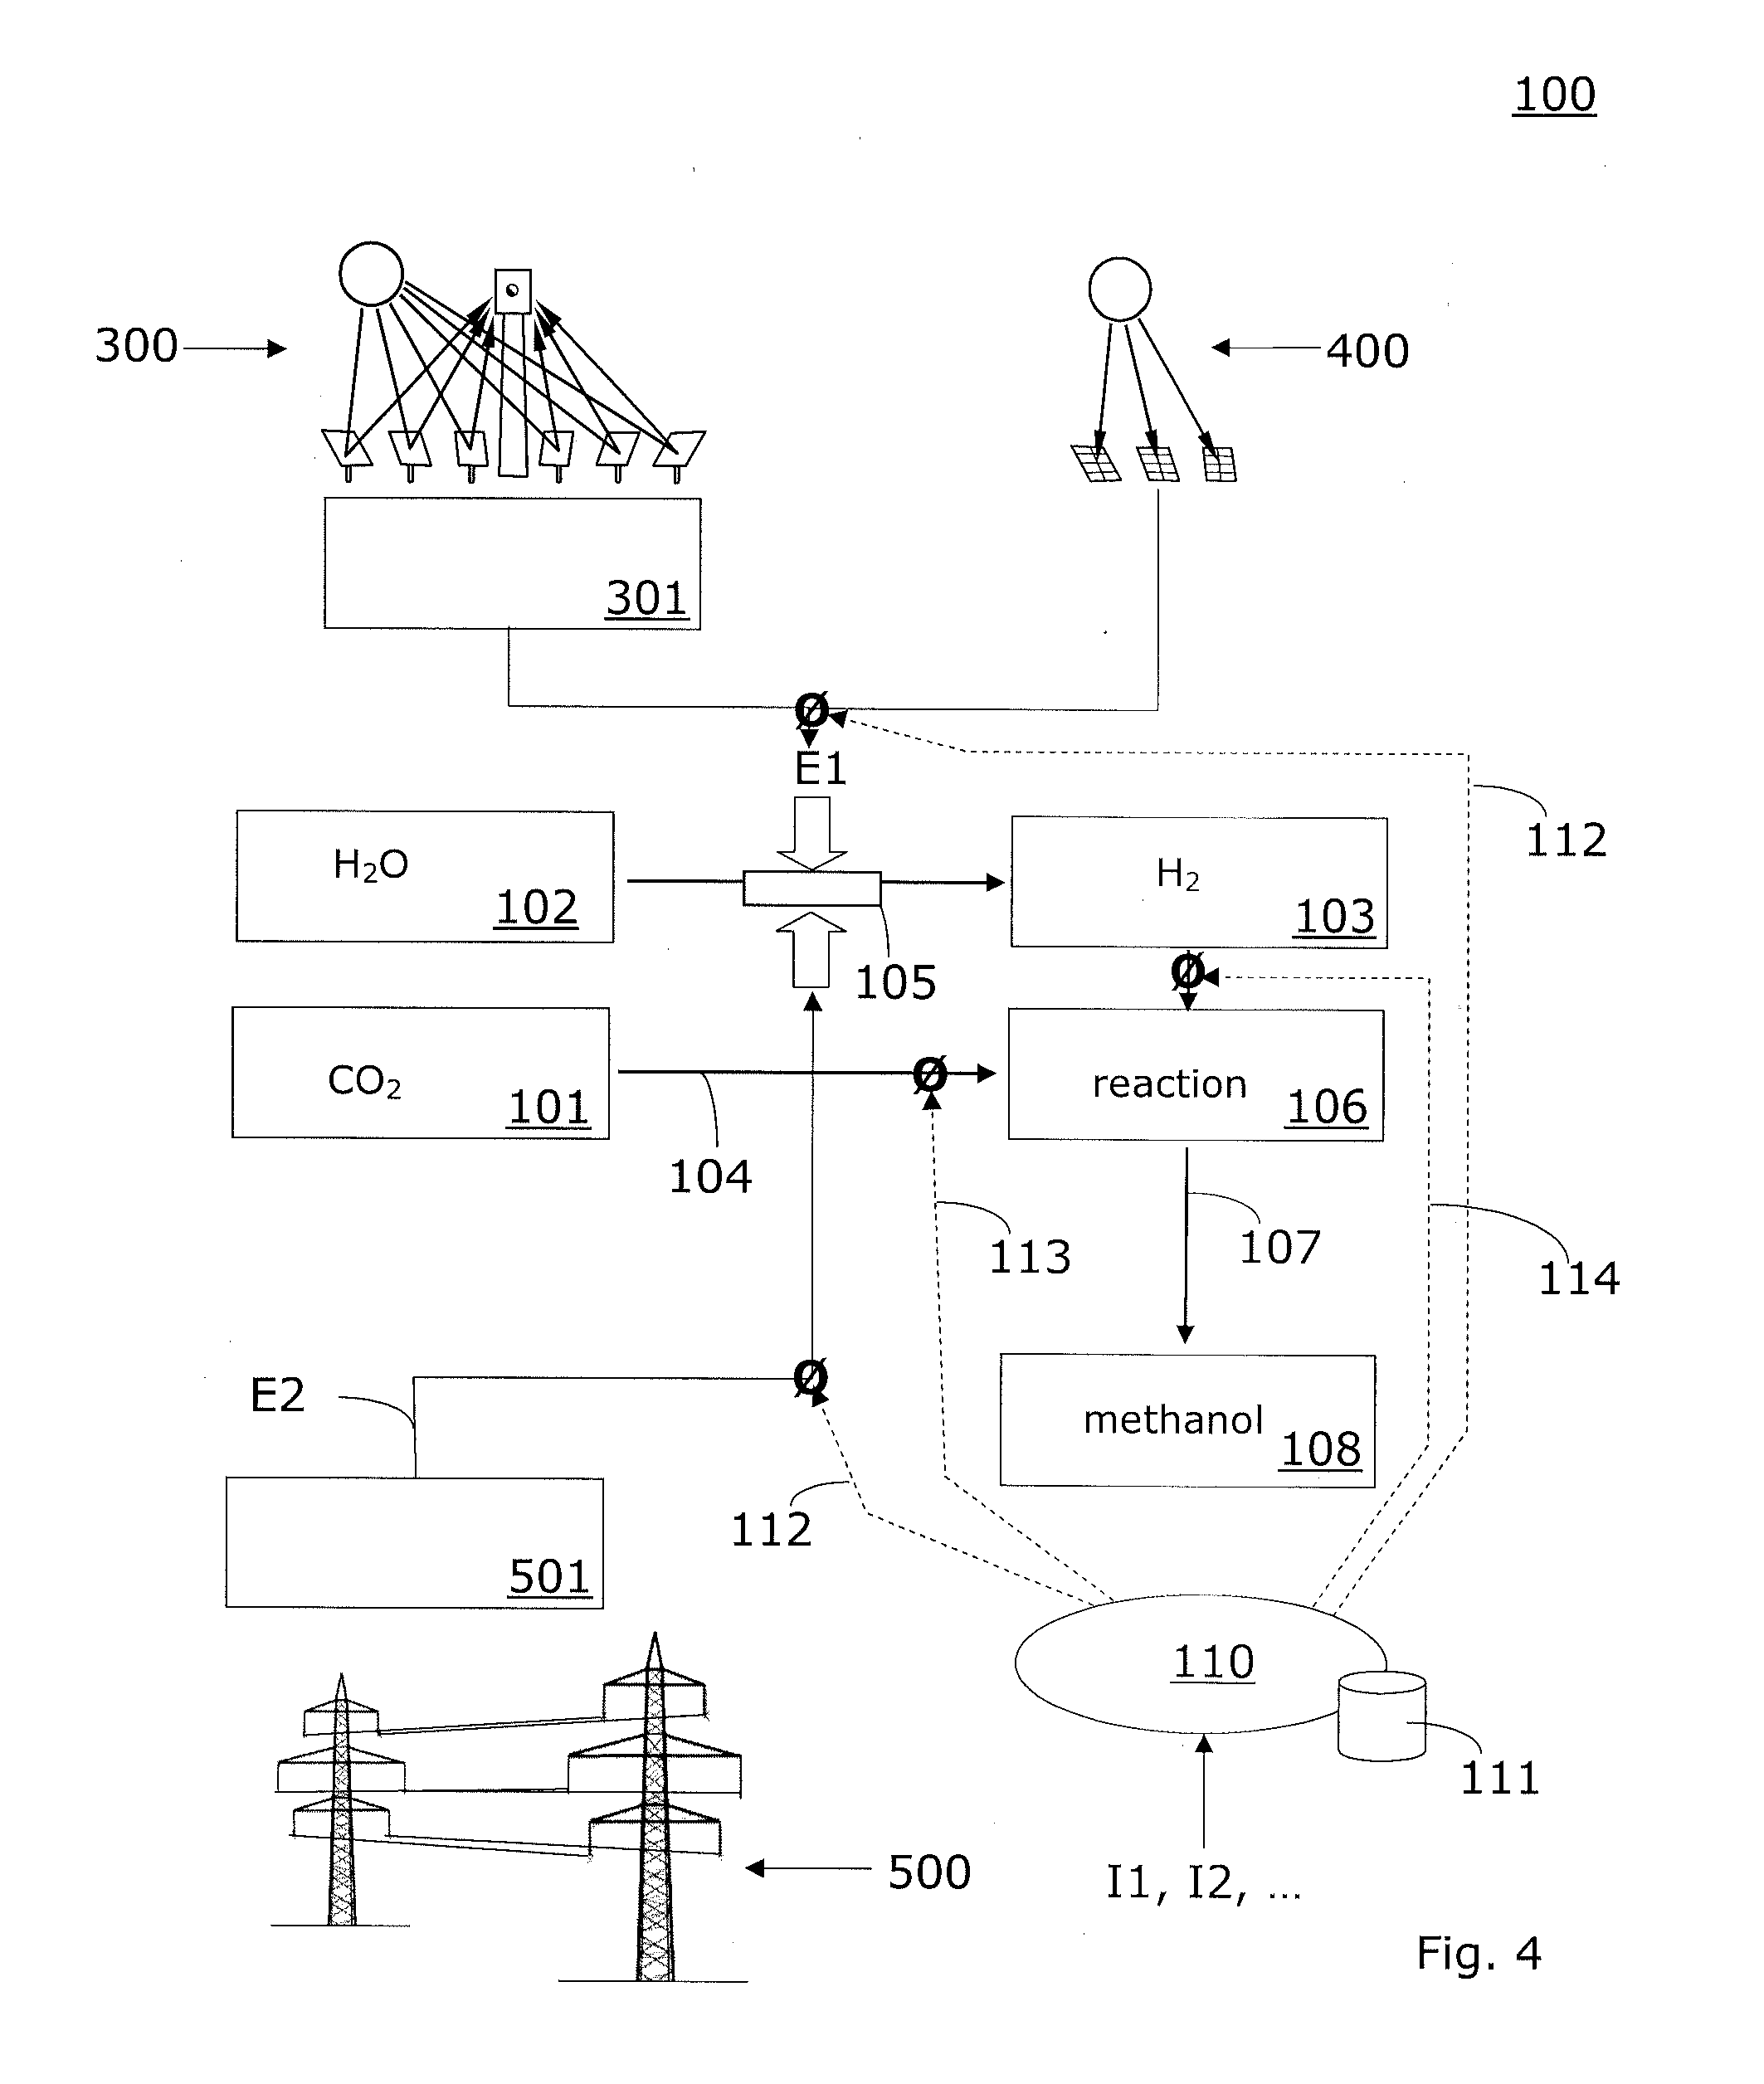 Method and facility system for providing an energy carrier by application of carbon dioxide as a carbon supplier of electric energy